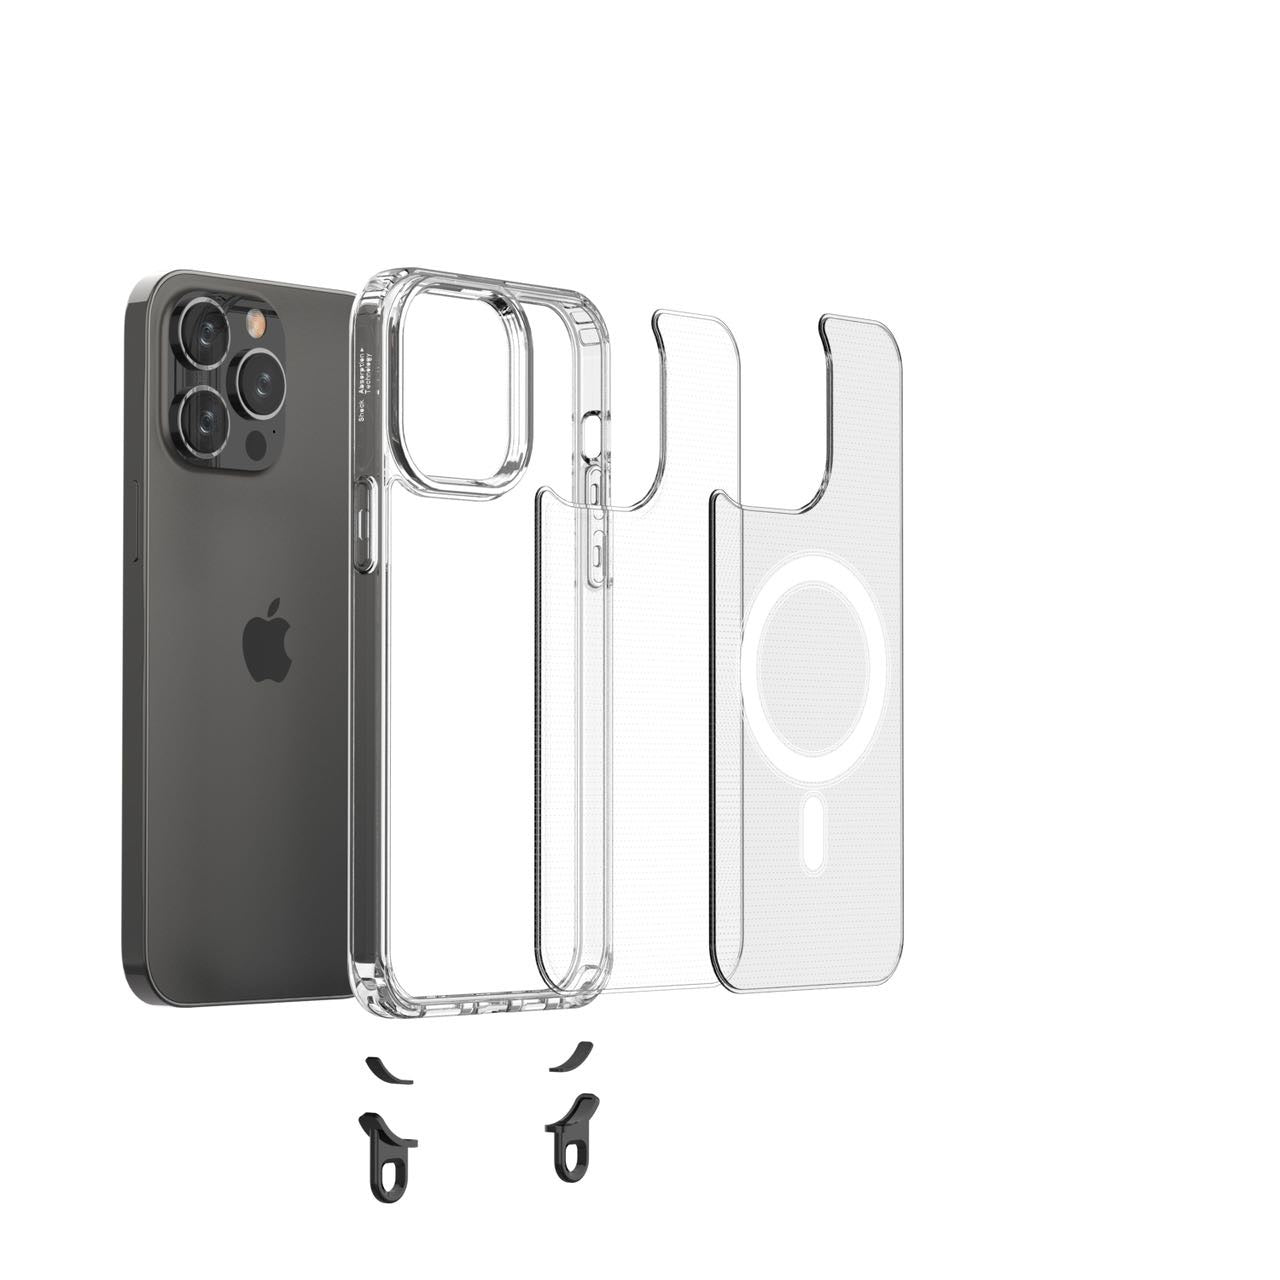 Aporia MagSafe Clear Case for iPhone 15+ with 3 Sets of Removable Hooks and Adjustable Lanyard: Clear case with MagSafe compatibility, includes versatile hooks and adjustable lanyard for personalized convenience and security.